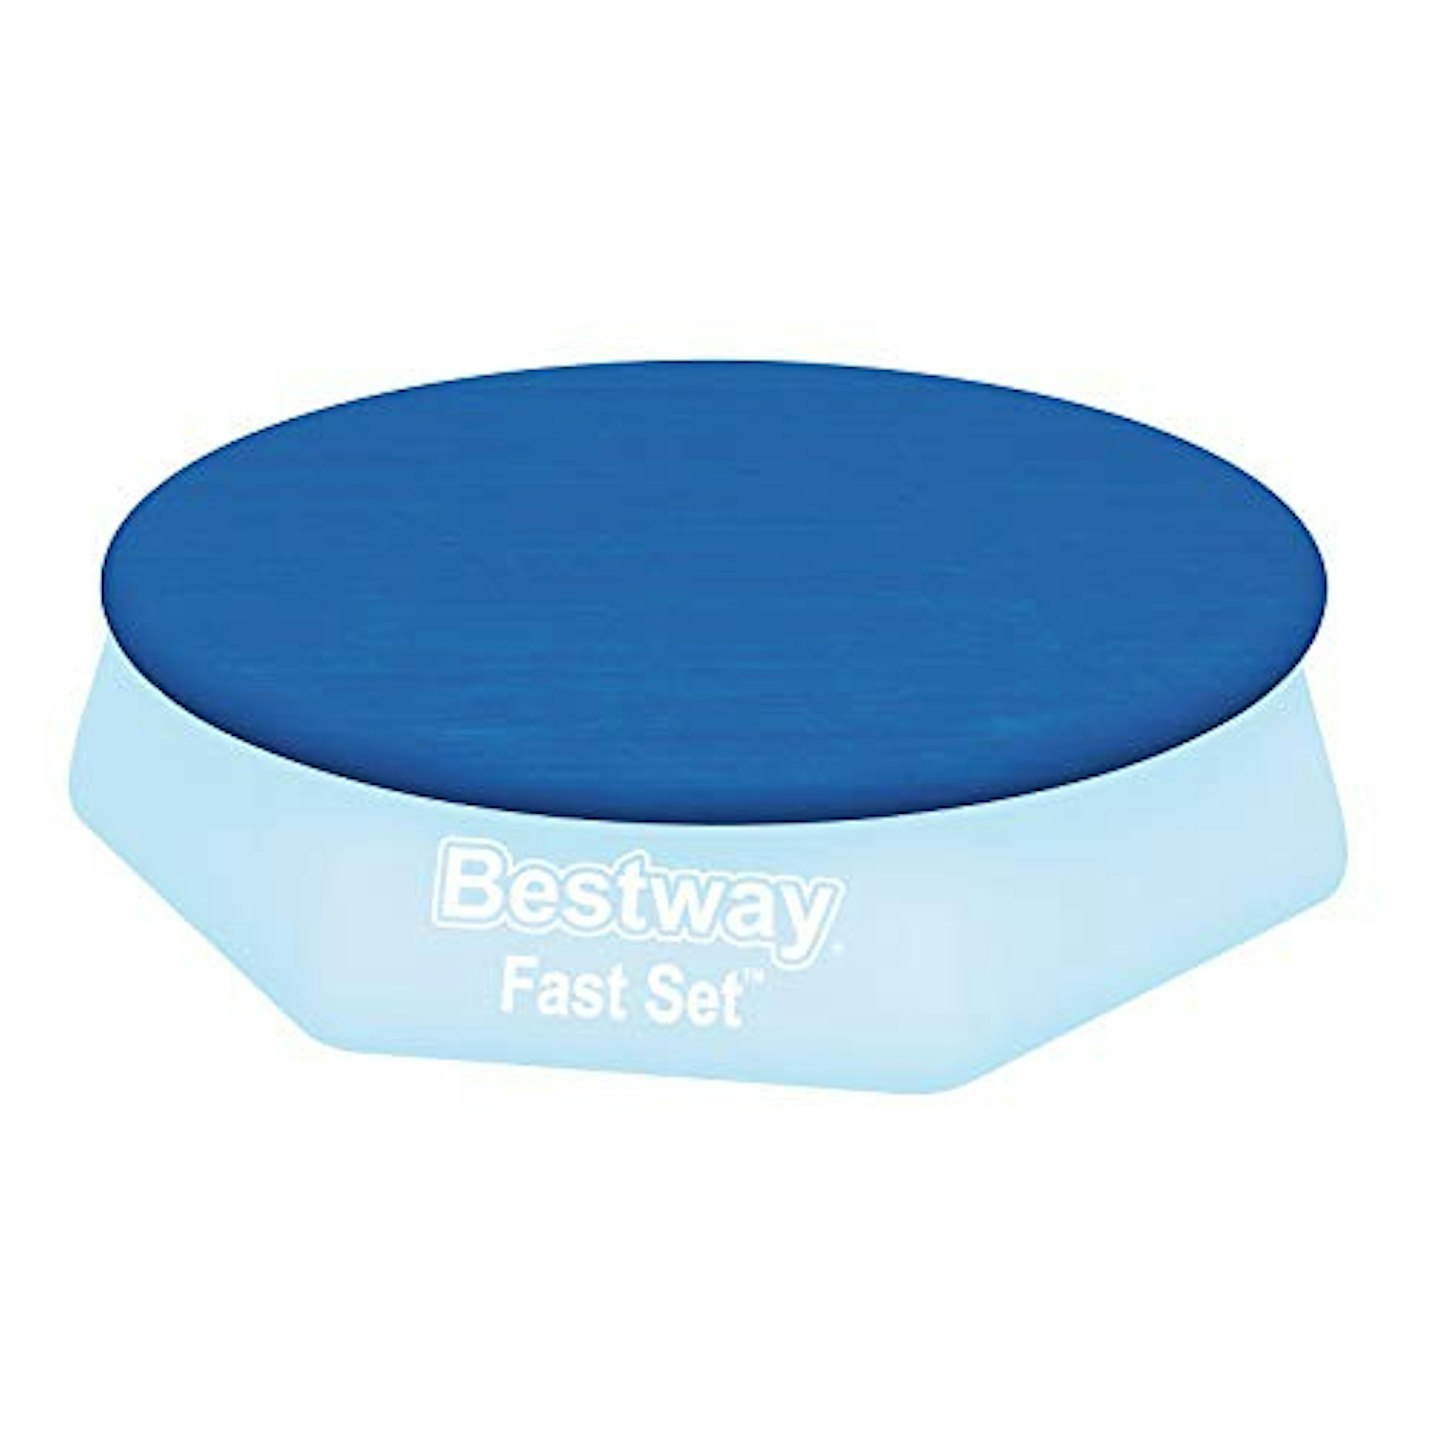 Bestway Fast Set Swimming Pool Cover